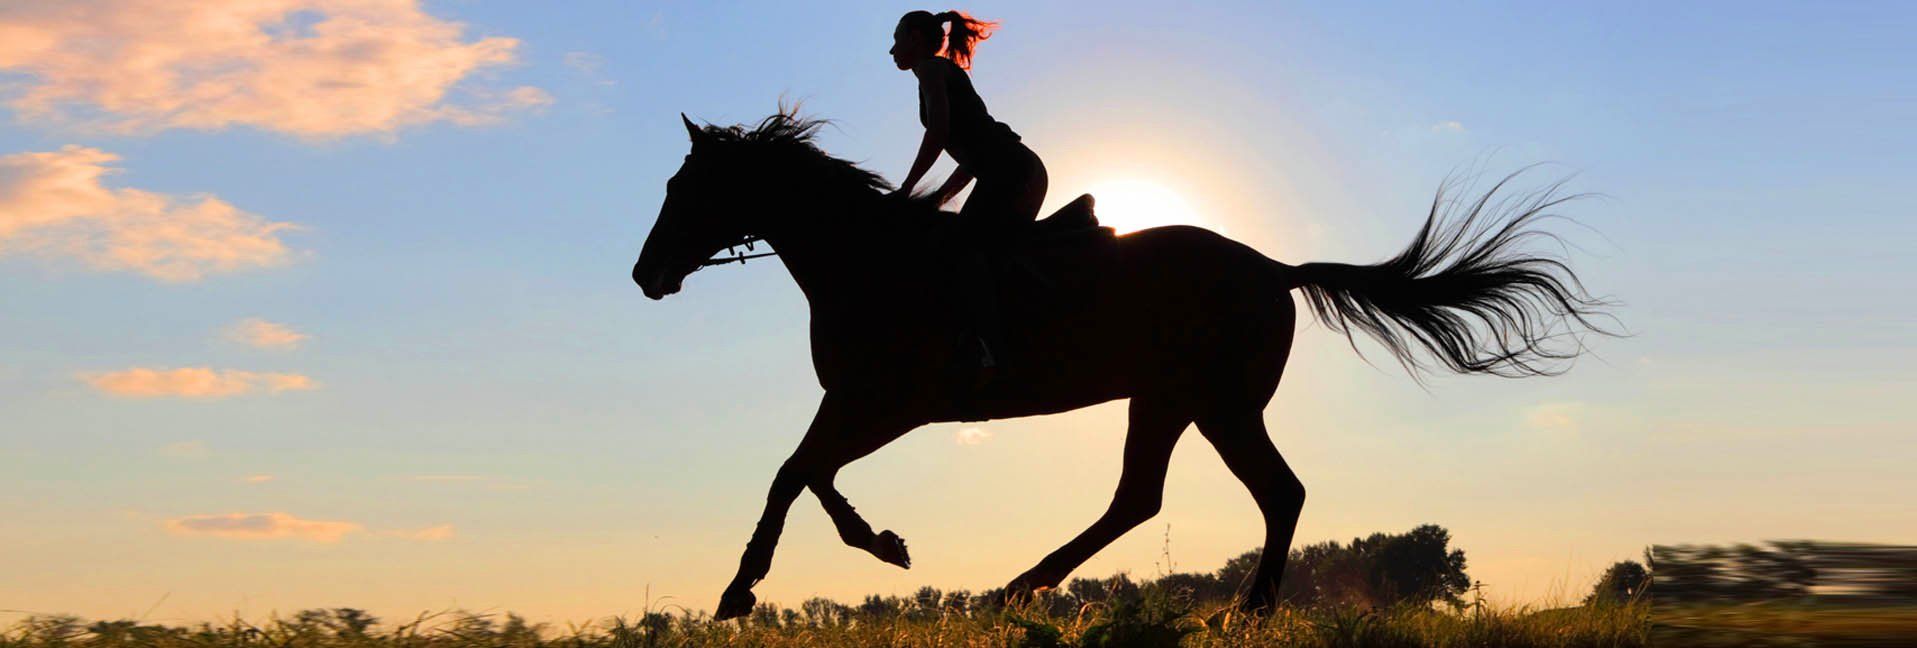 Good For Both-Three new riding activities you can try with your horse this weekend